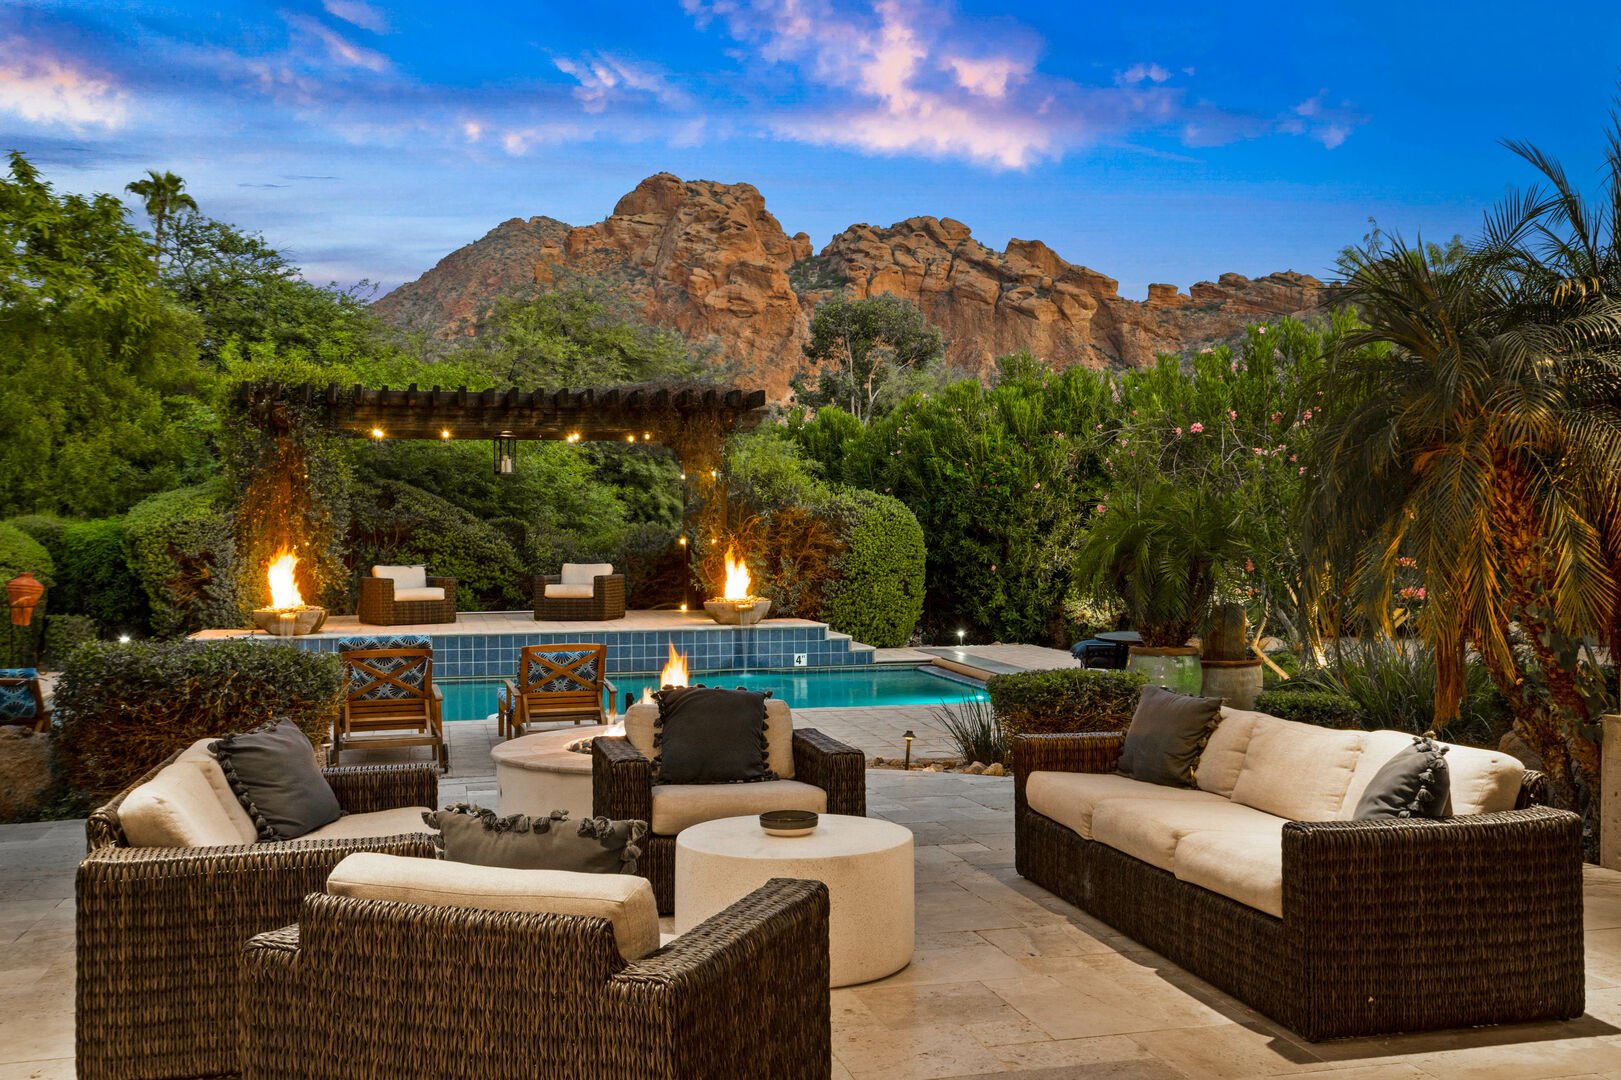 Check Out Our Paradise Valley Vacation Rentals